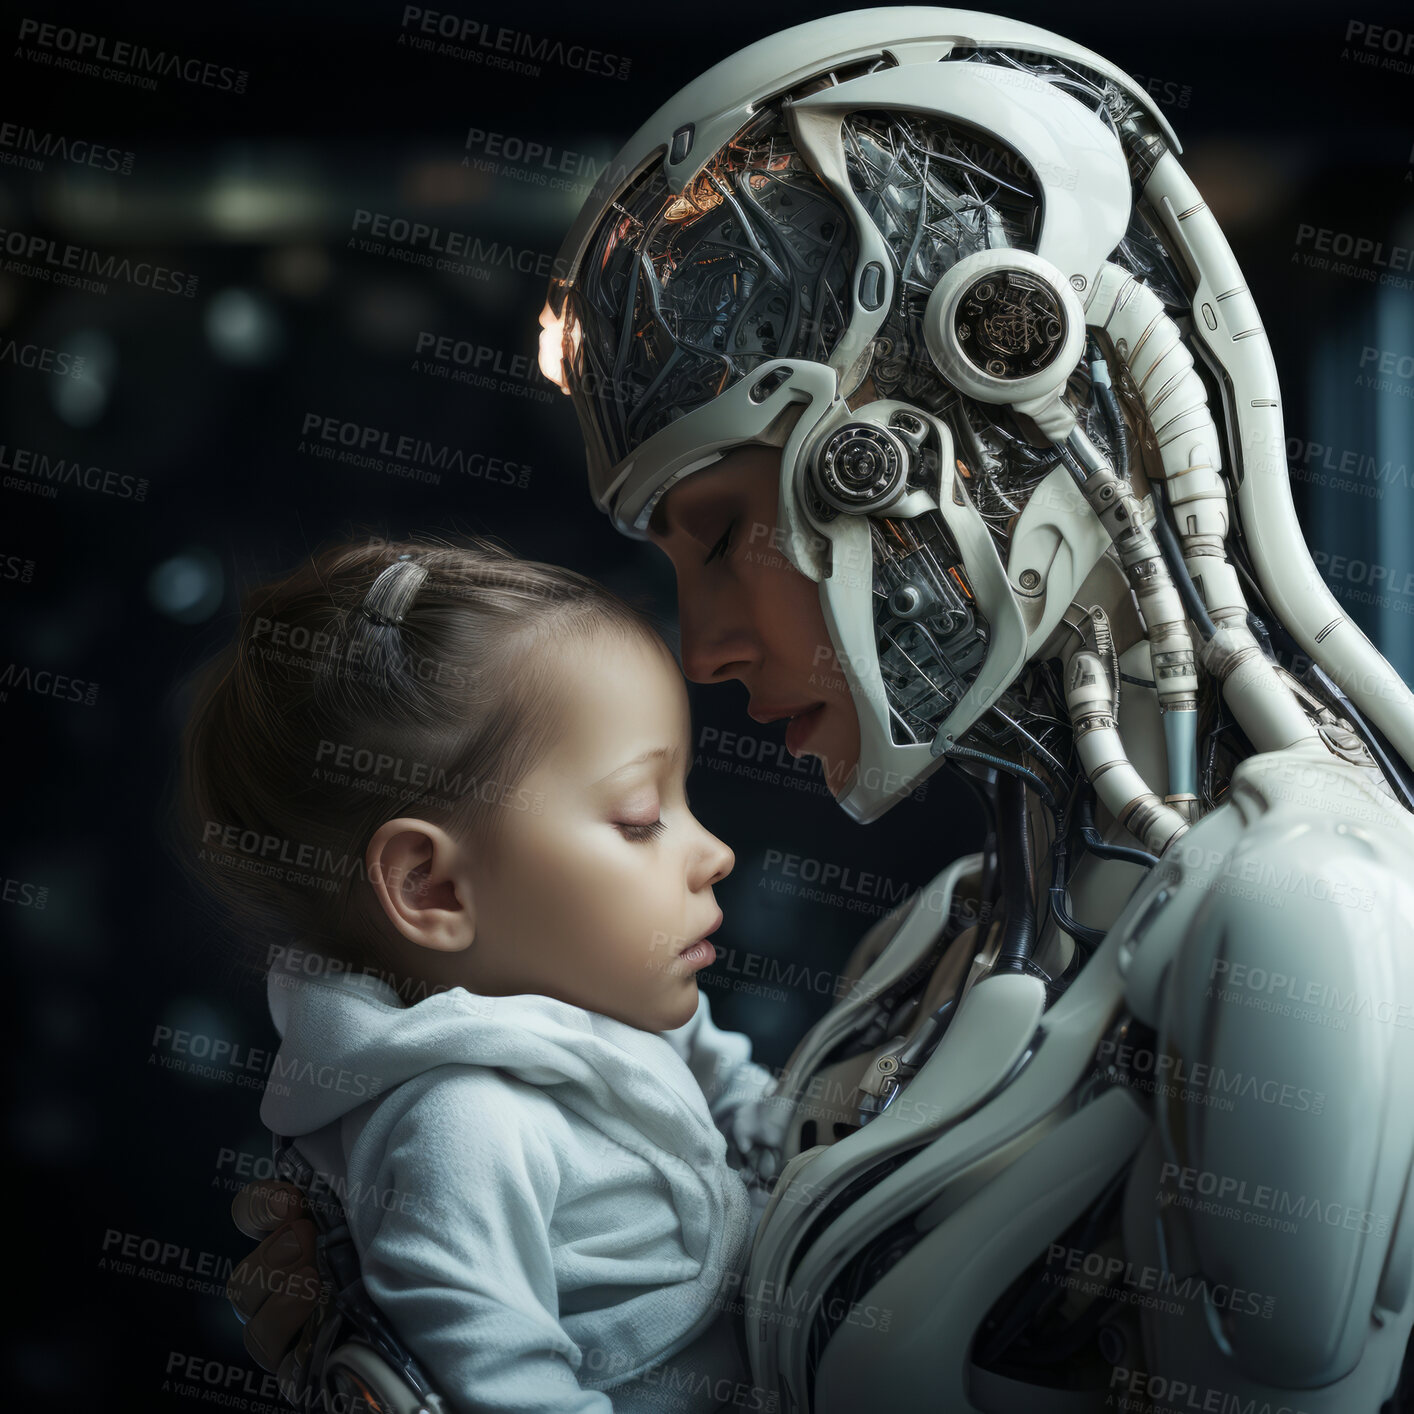 Buy stock photo Robotic android mother holding human baby.Futuristic love, man and machine.